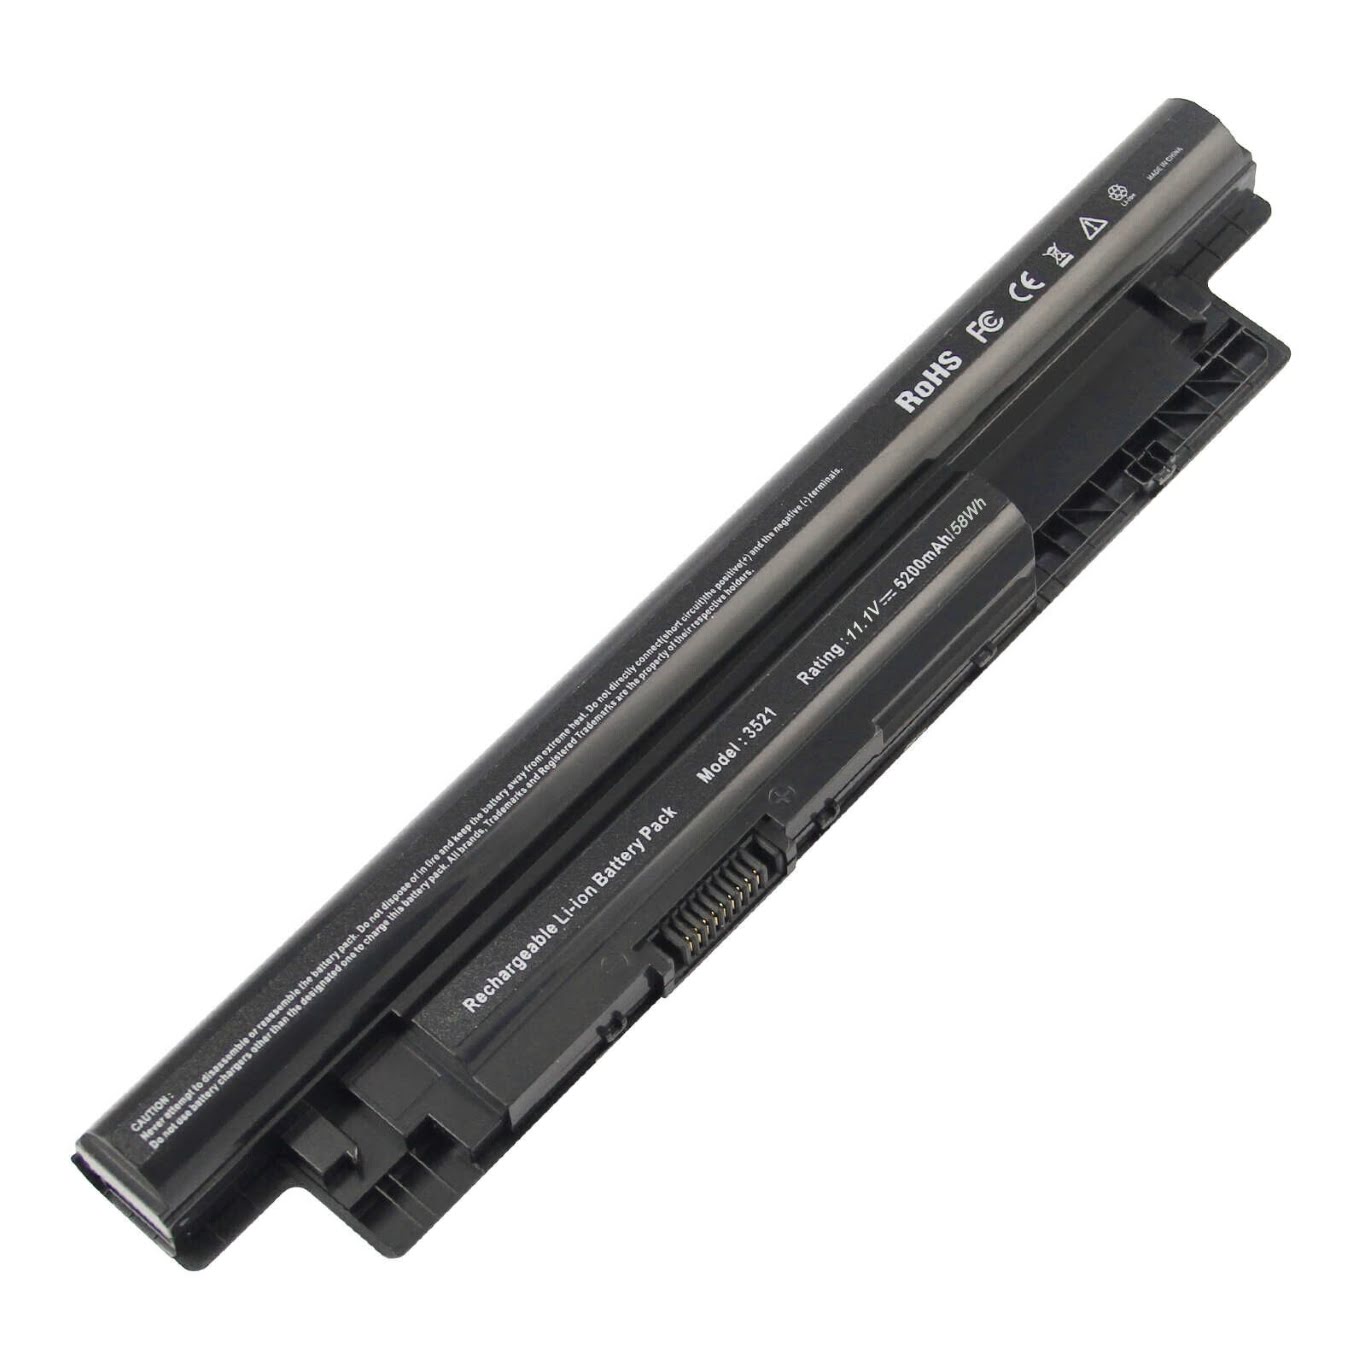 00R271, 0MF69 replacement Laptop Battery for Dell 15R-5537 Series, 15R-N3521 Series, 6 cells, 11.1 V, 5200 Mah